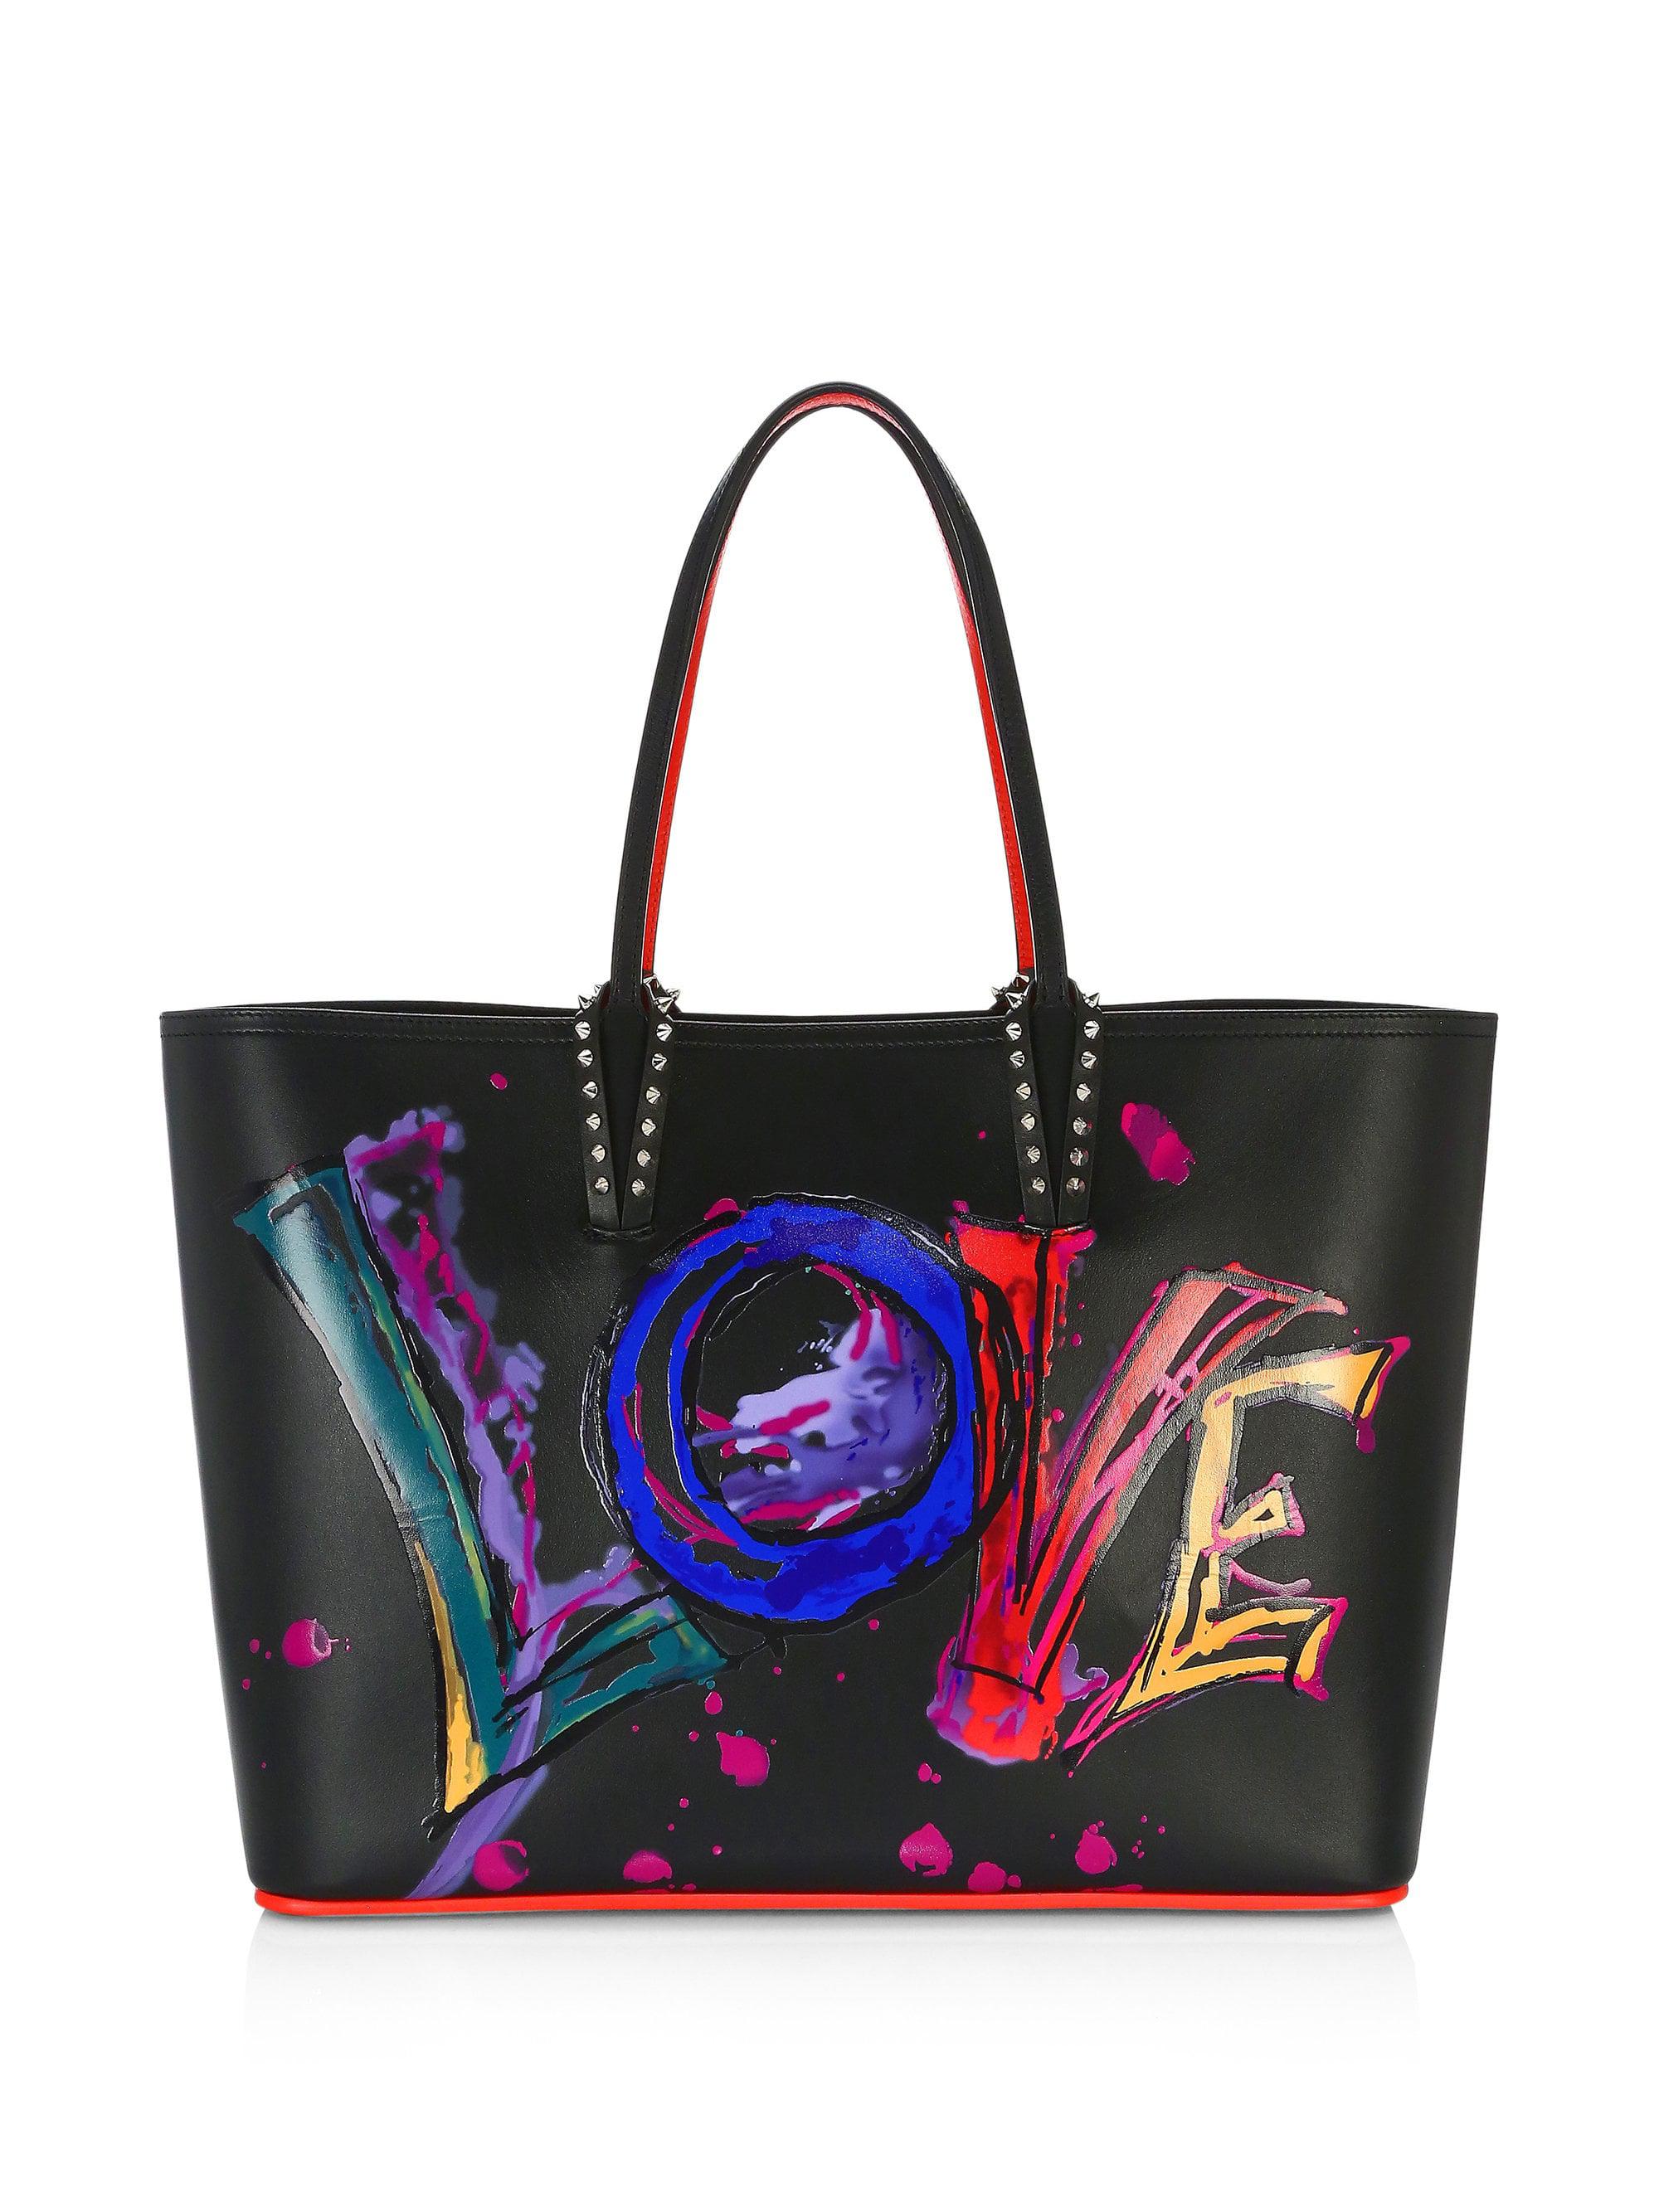 Christian Louboutin Leather Cabata Love Tote Bag in Black | Lyst